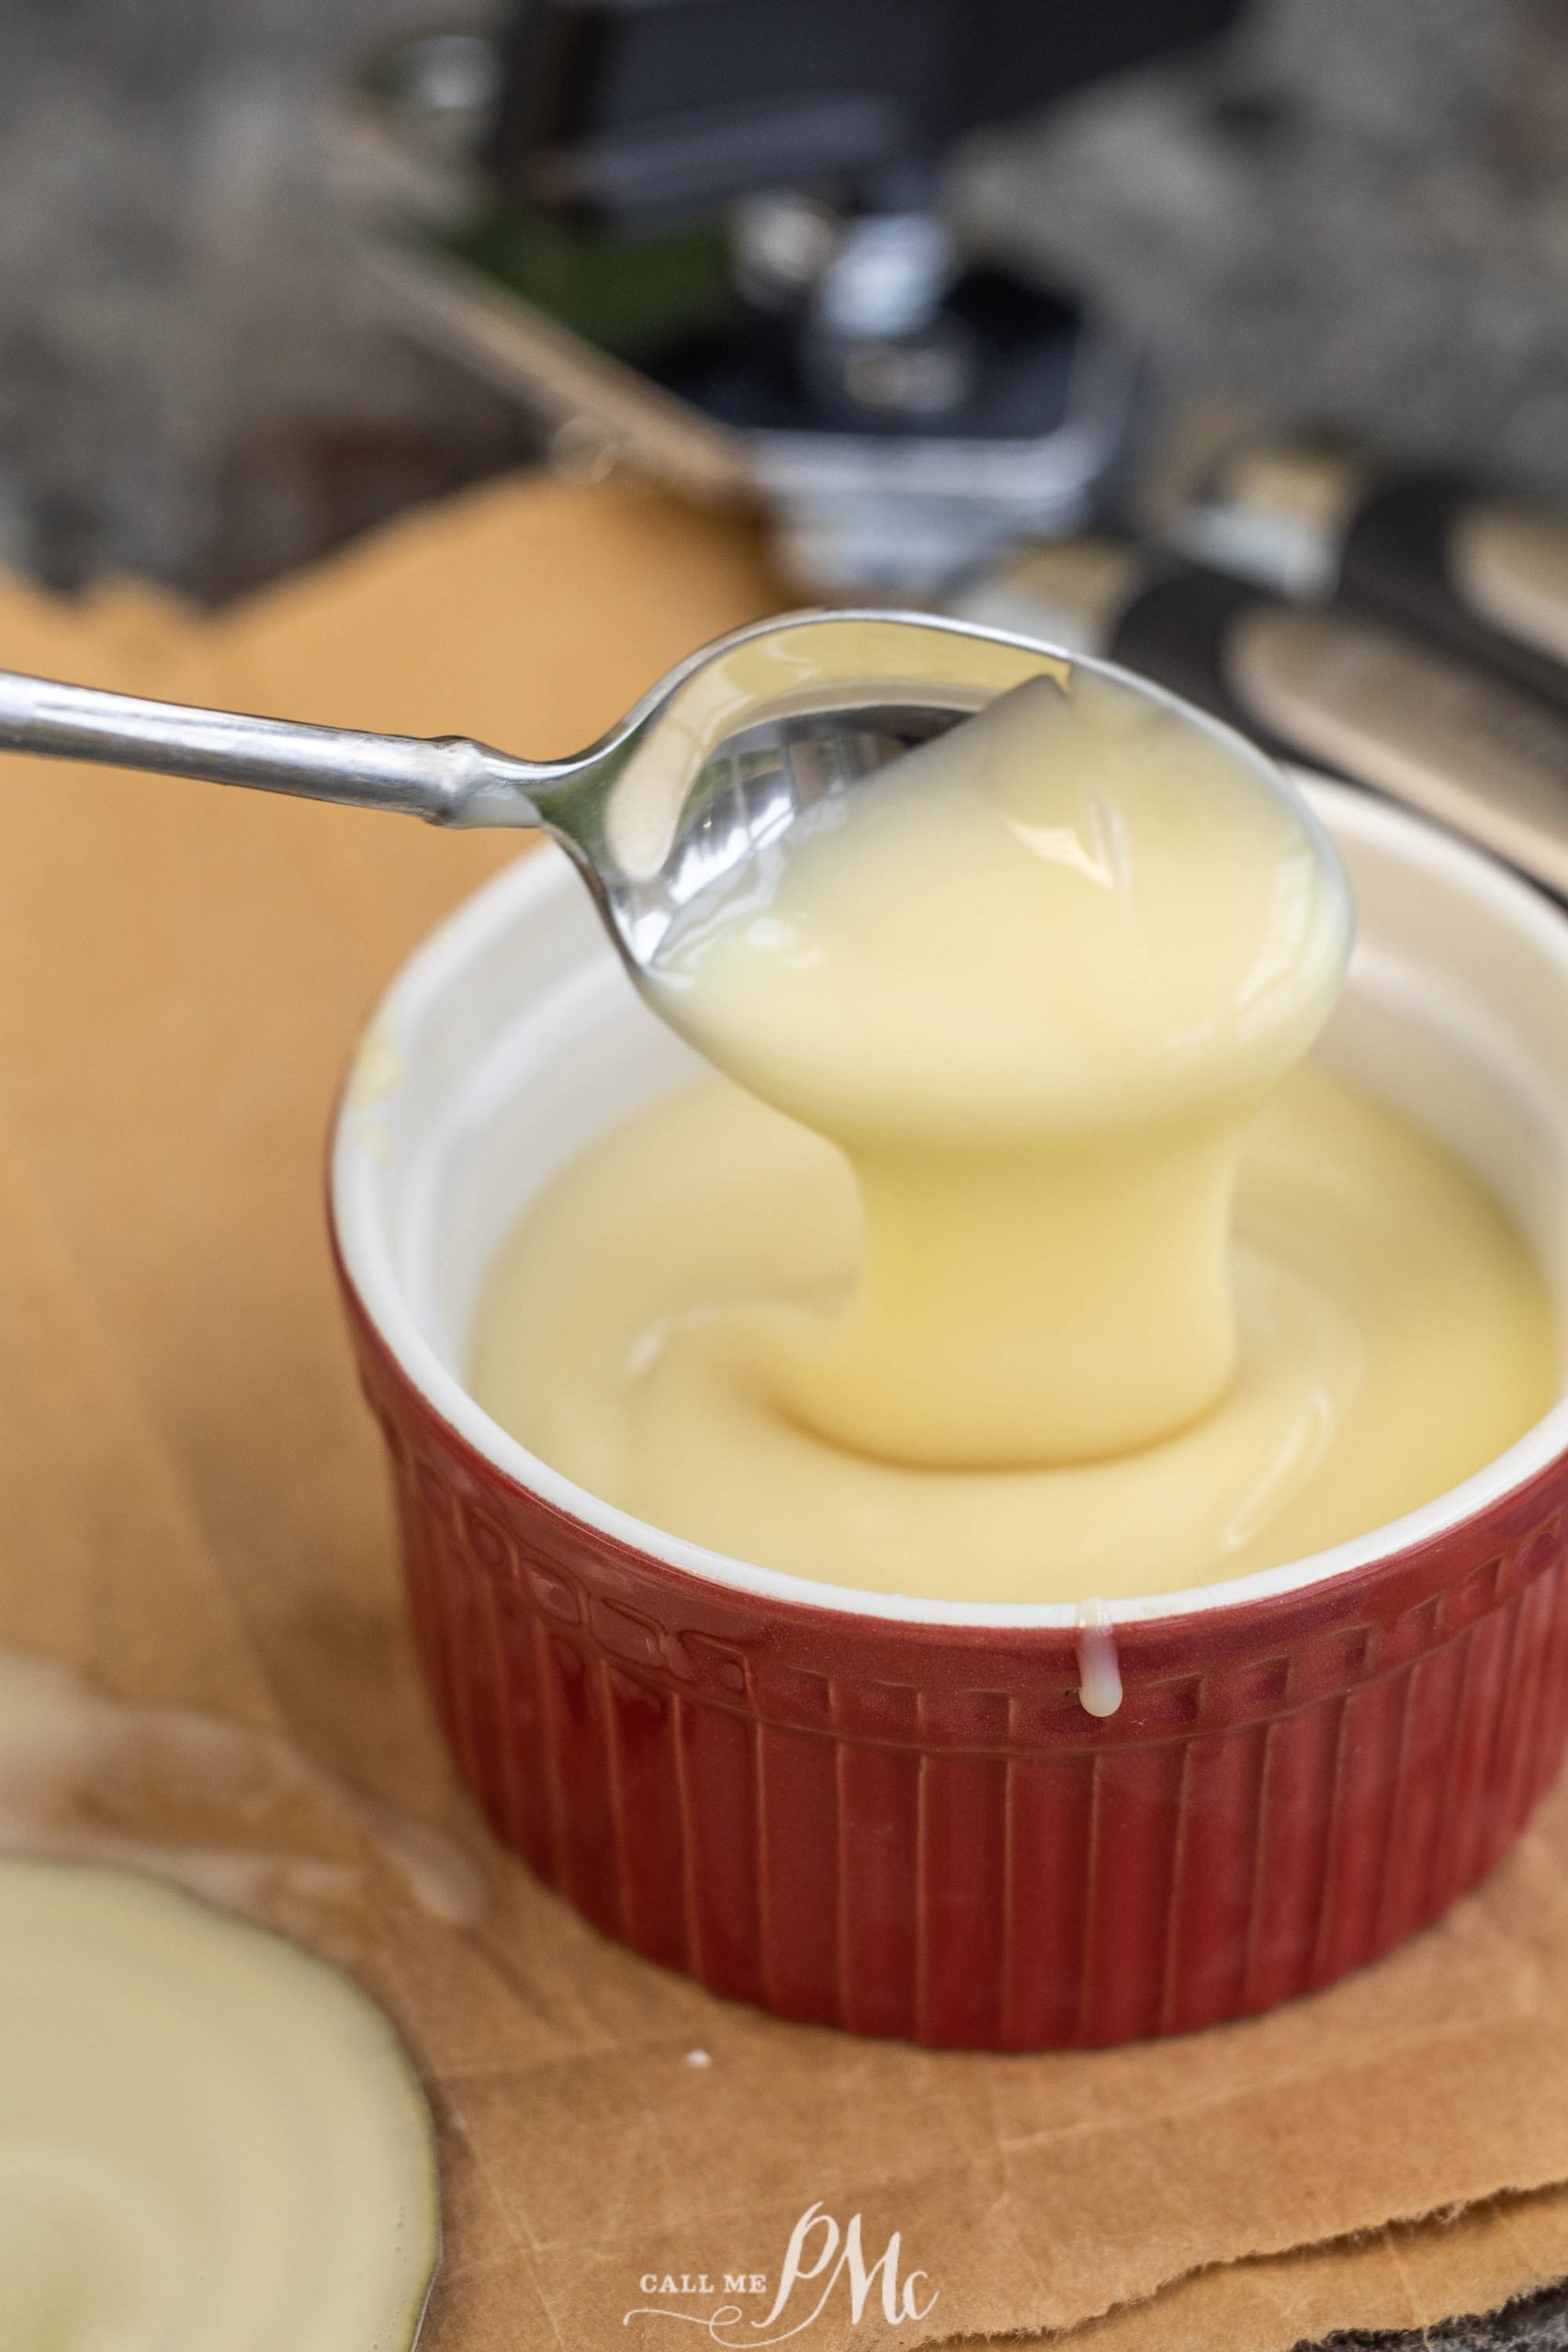 A spoon is pouring a SWEETENED condensed milk into a bowl.